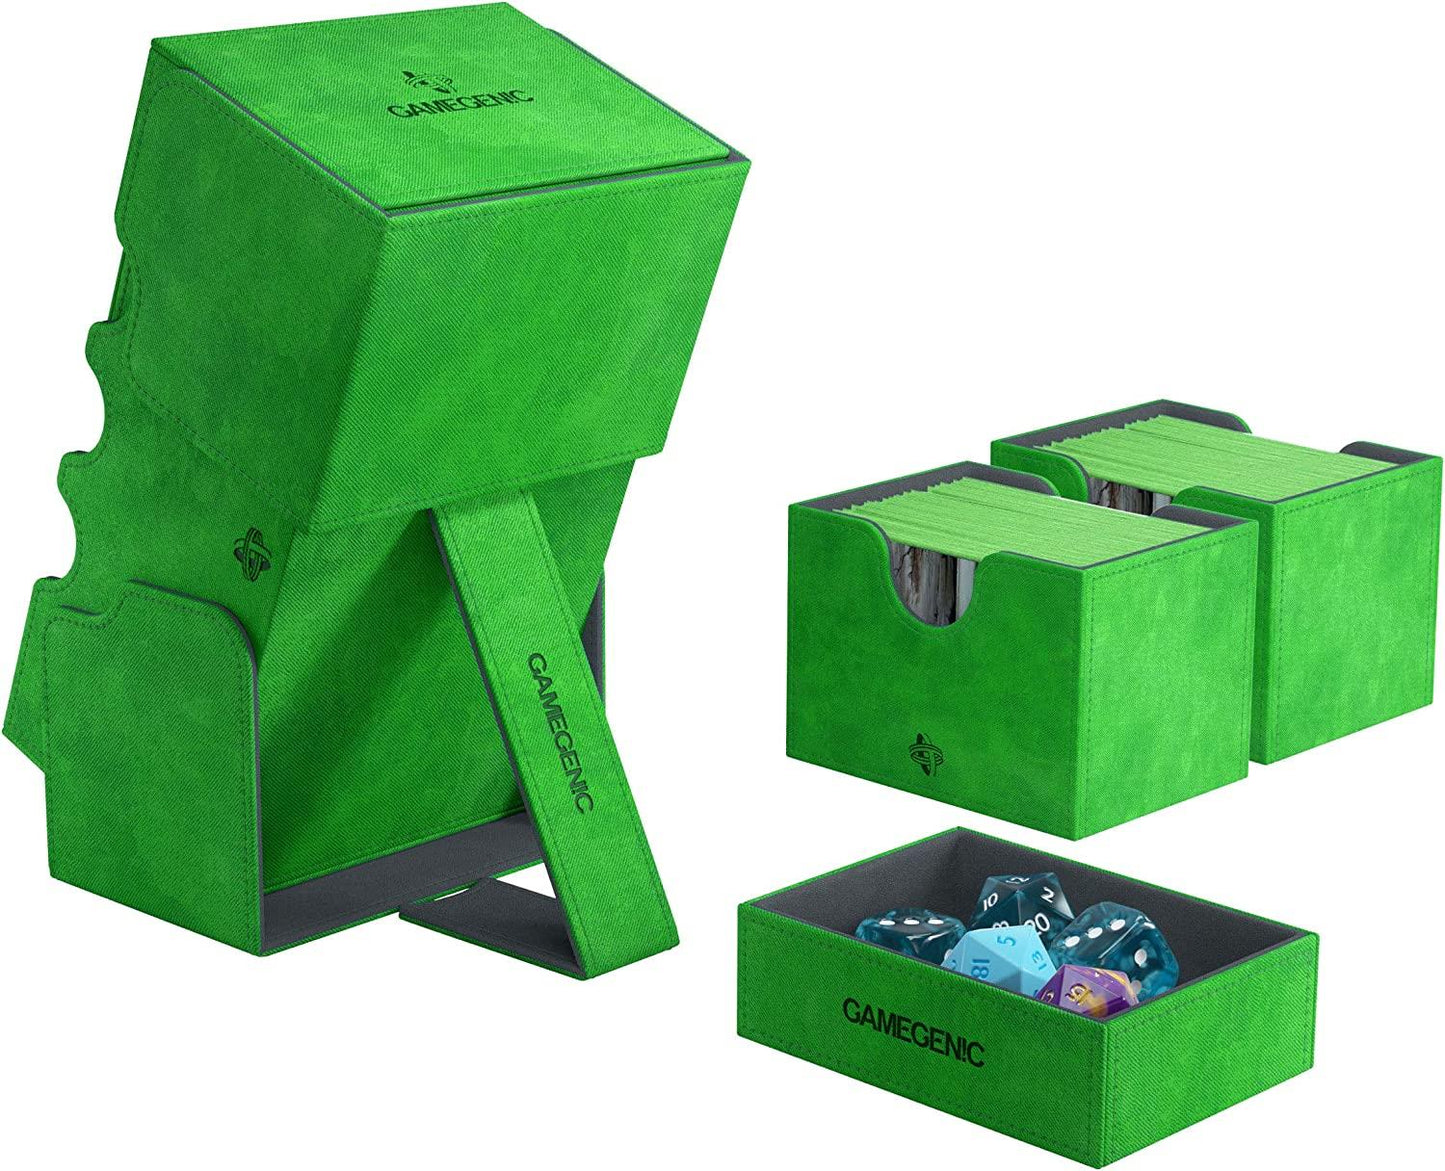 Stronghold Deck Box 200+  Green    TCG Gamegenic